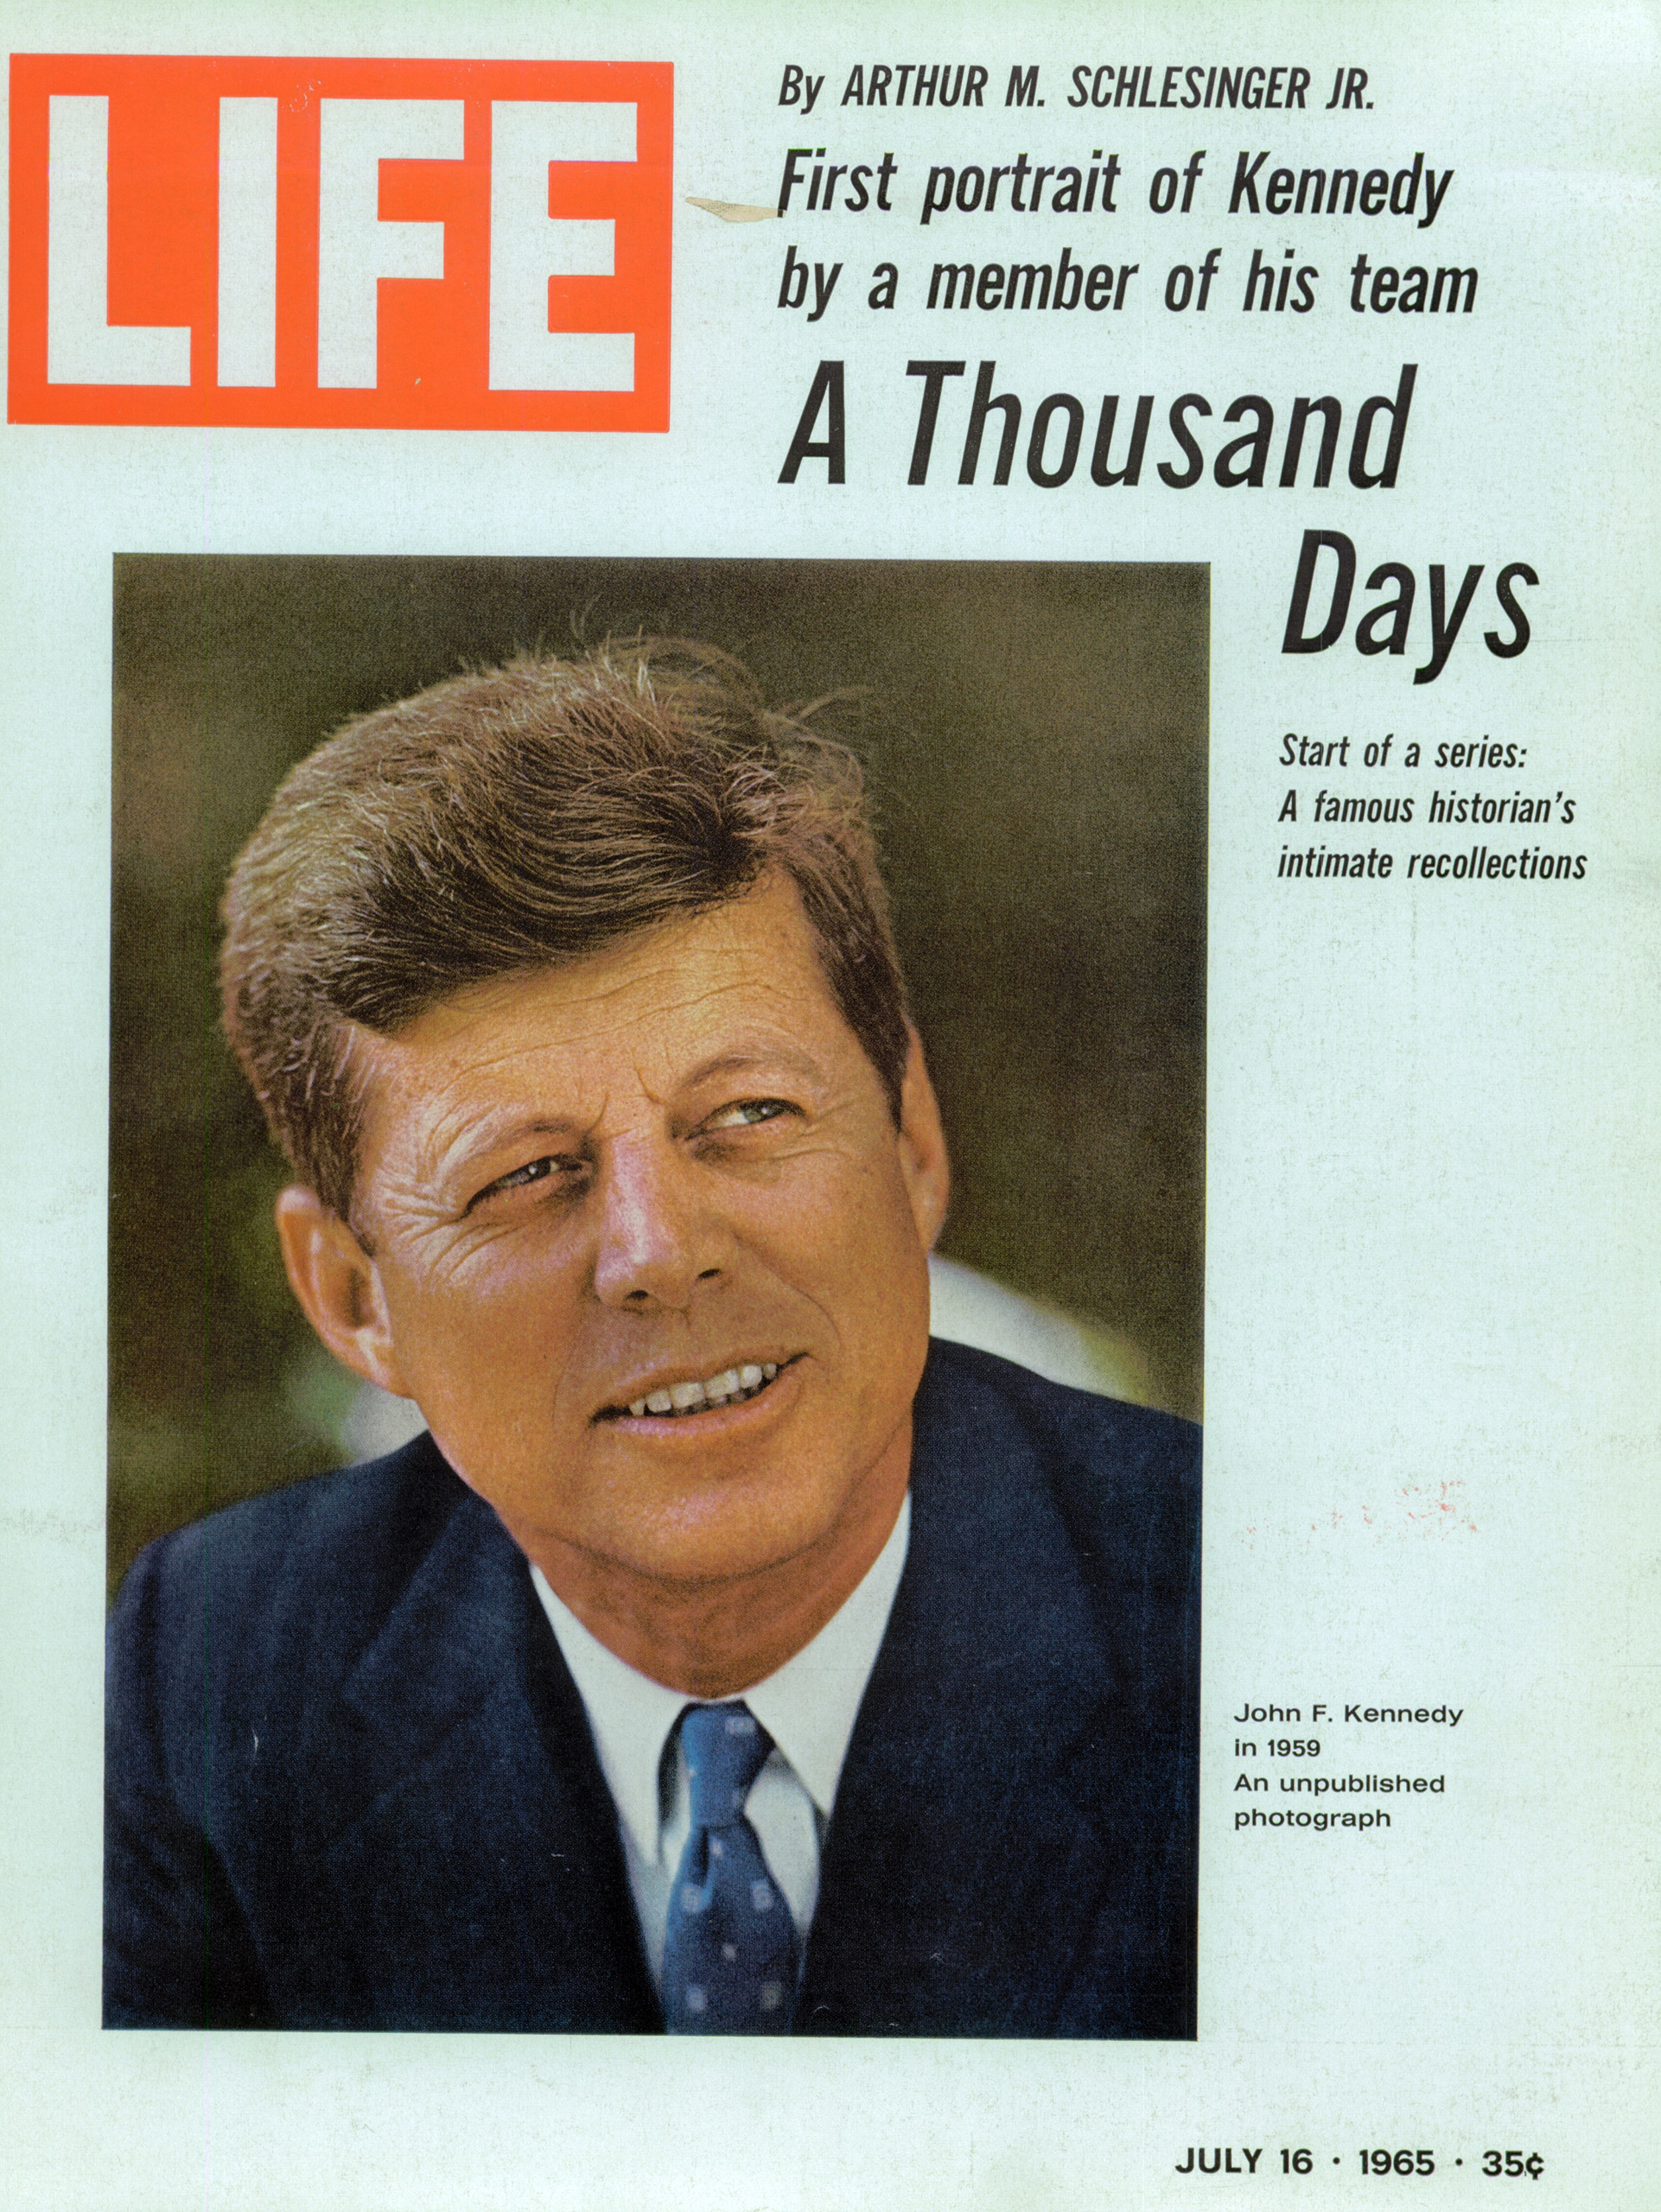 July 16, 1965 cover of LIFE magazine. Cover photo by Mark Shaw.